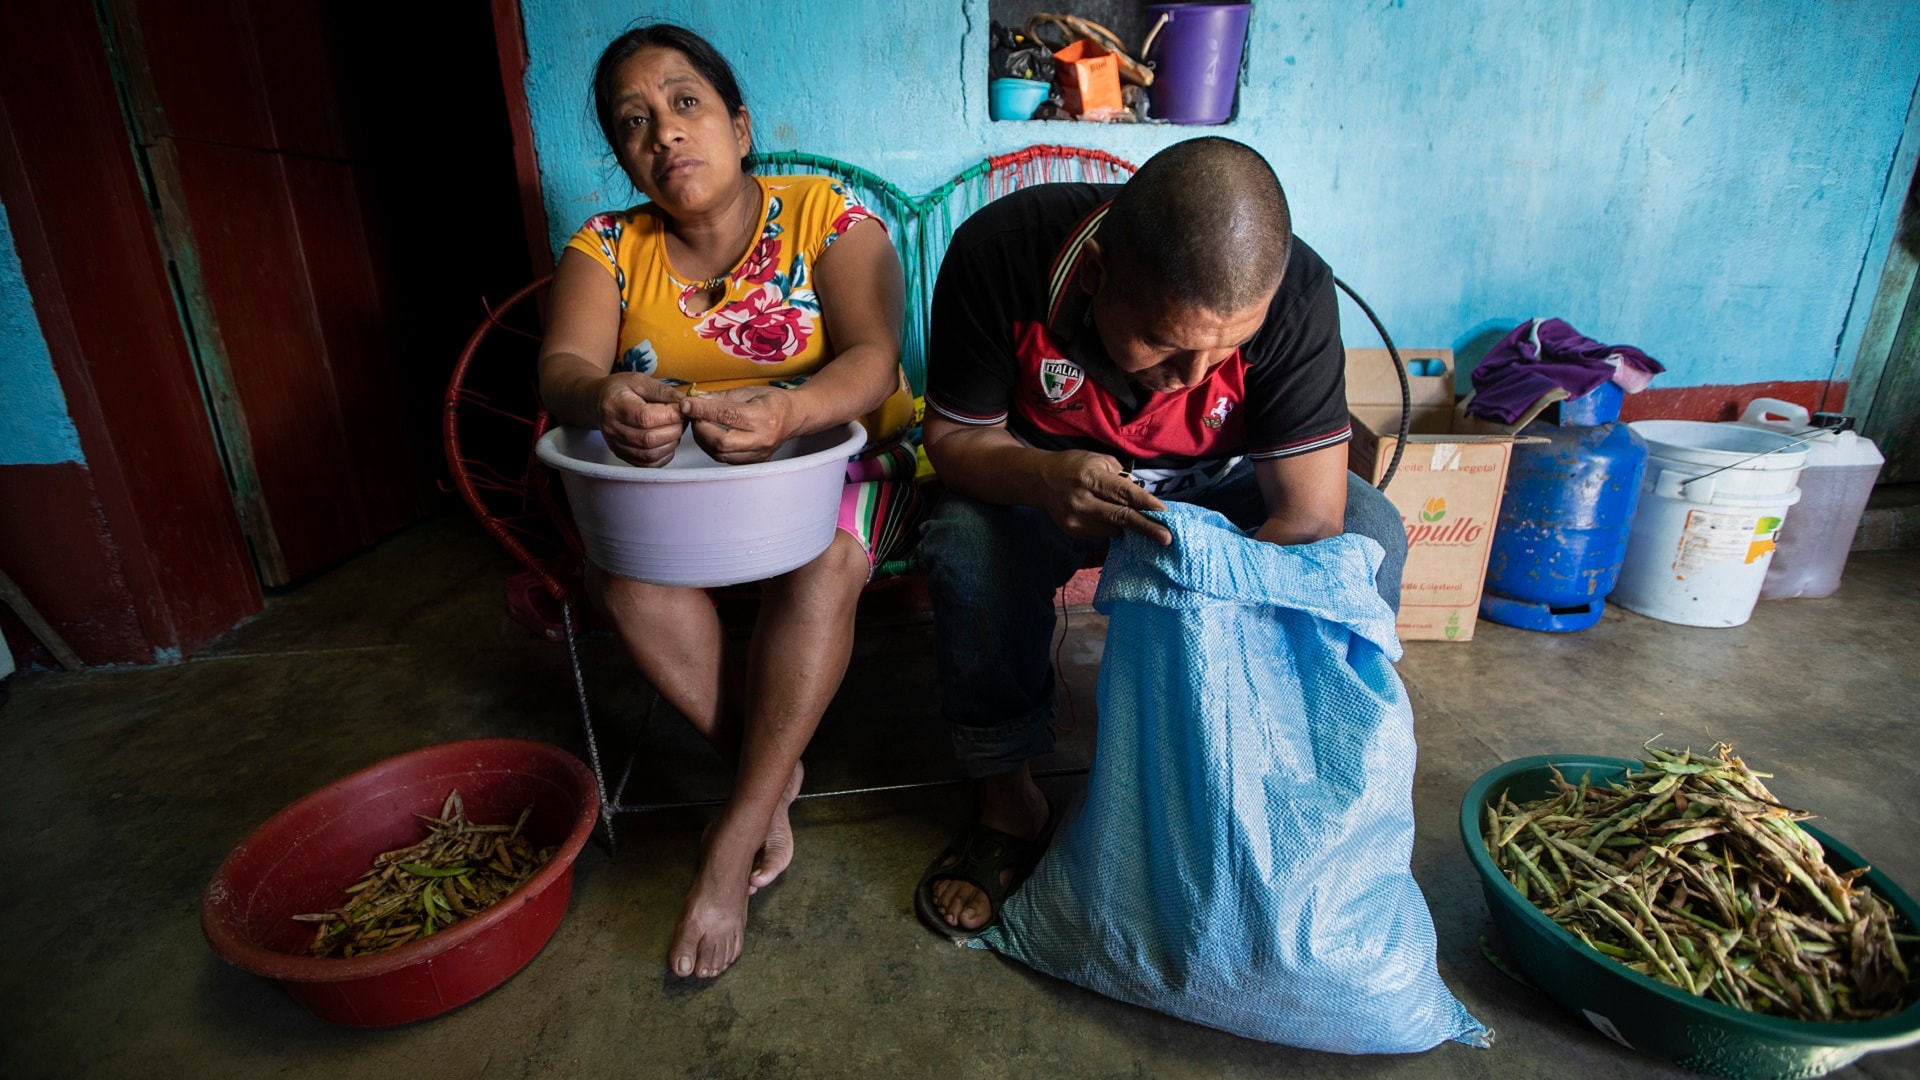 In photos: How Guatemalan lives are being upturned by failed immigration bids